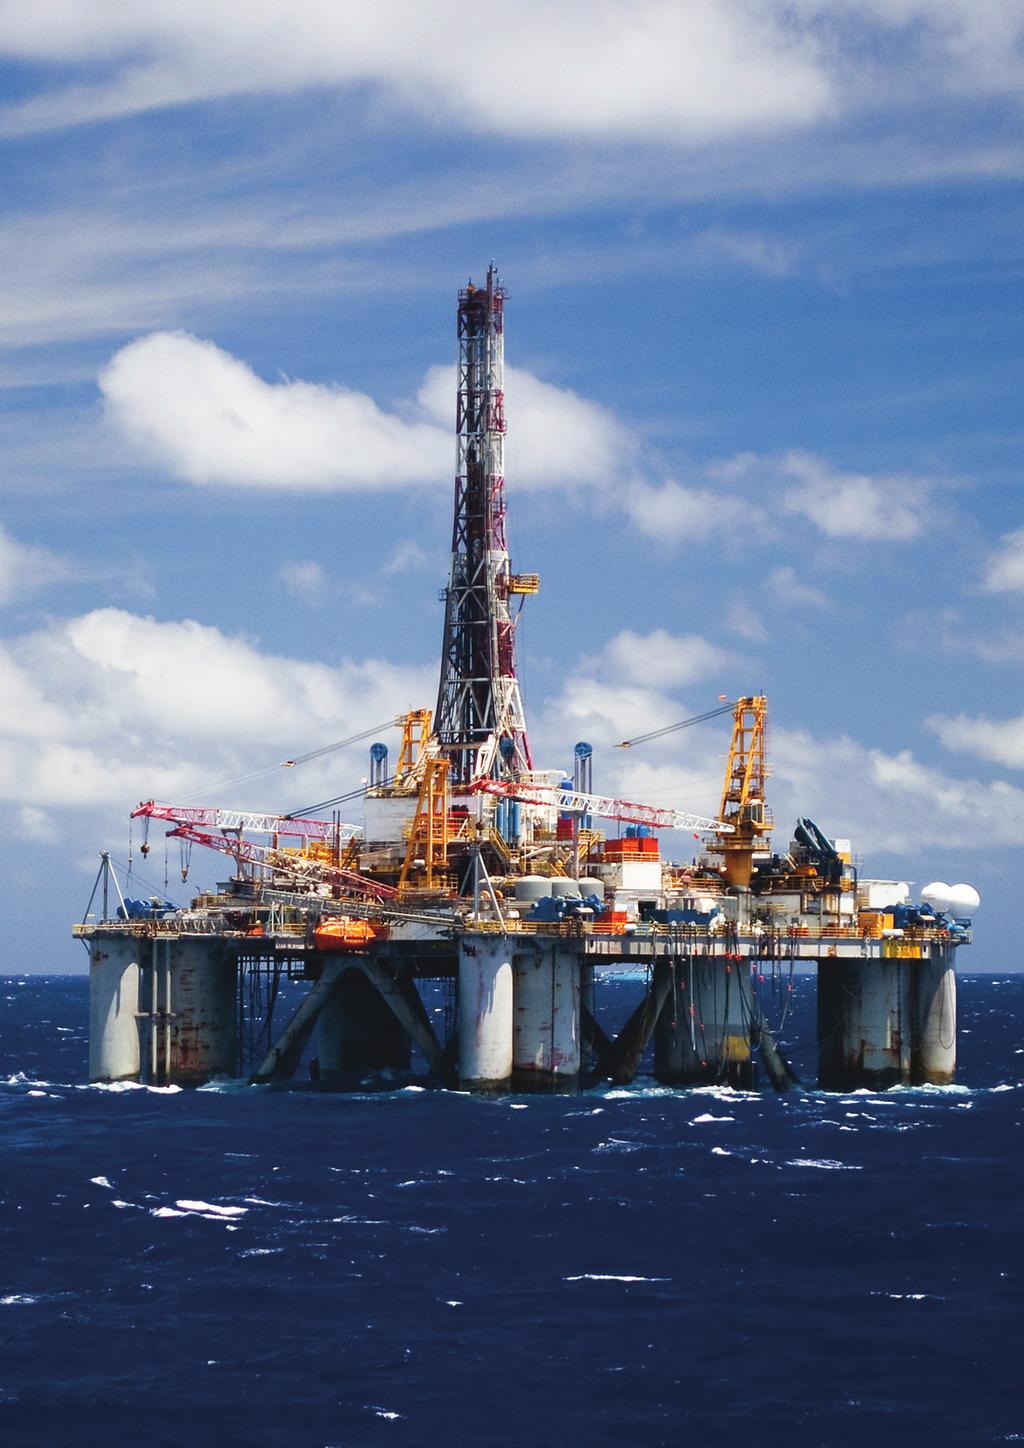 Working in deepwater applications where expenses routinely exceed $1 million per day, our system